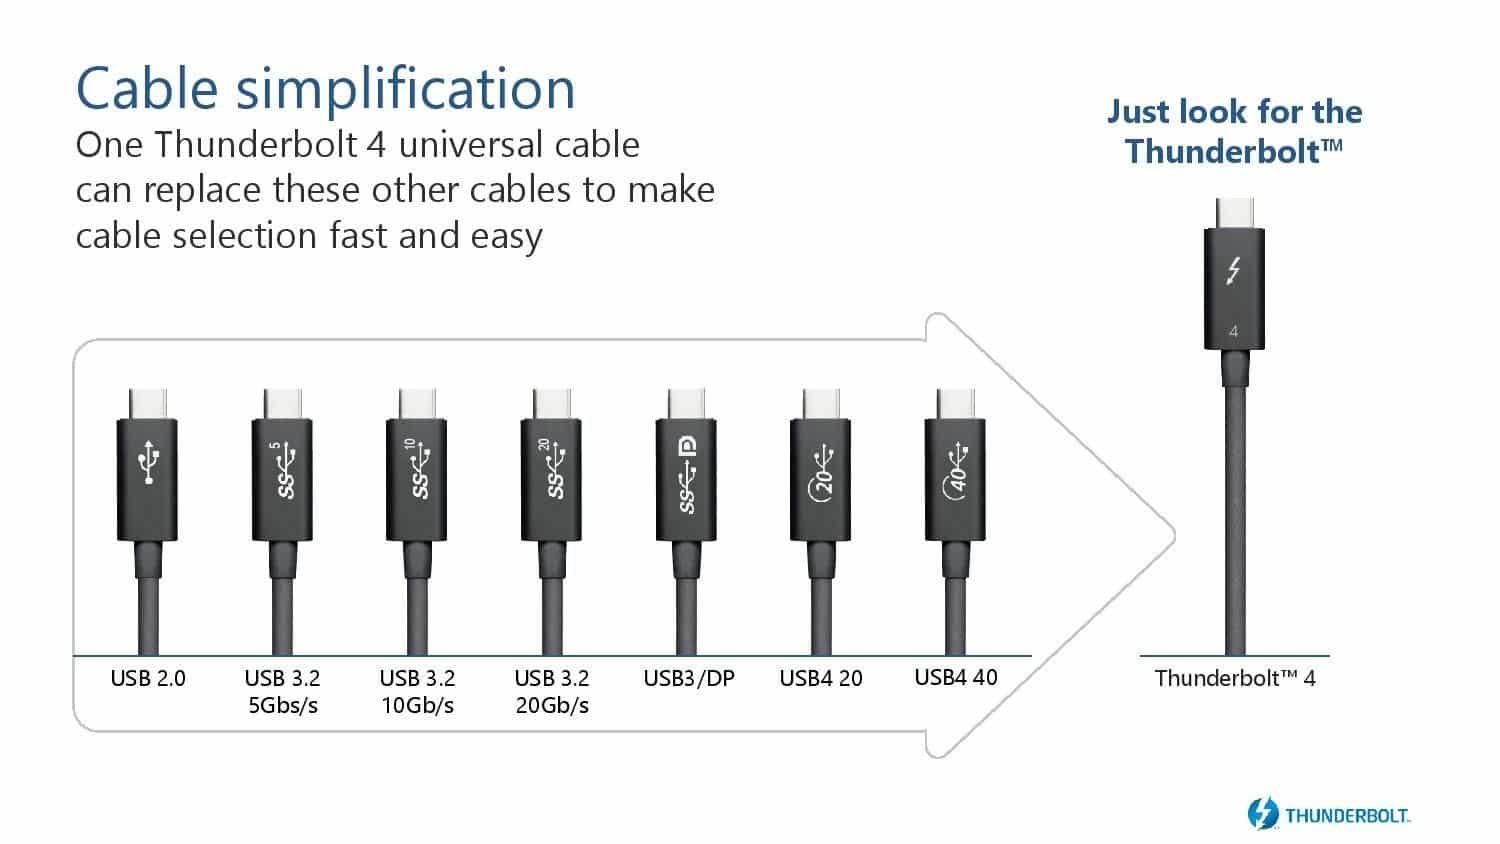 Thunderbolt 4 Cable Simplification